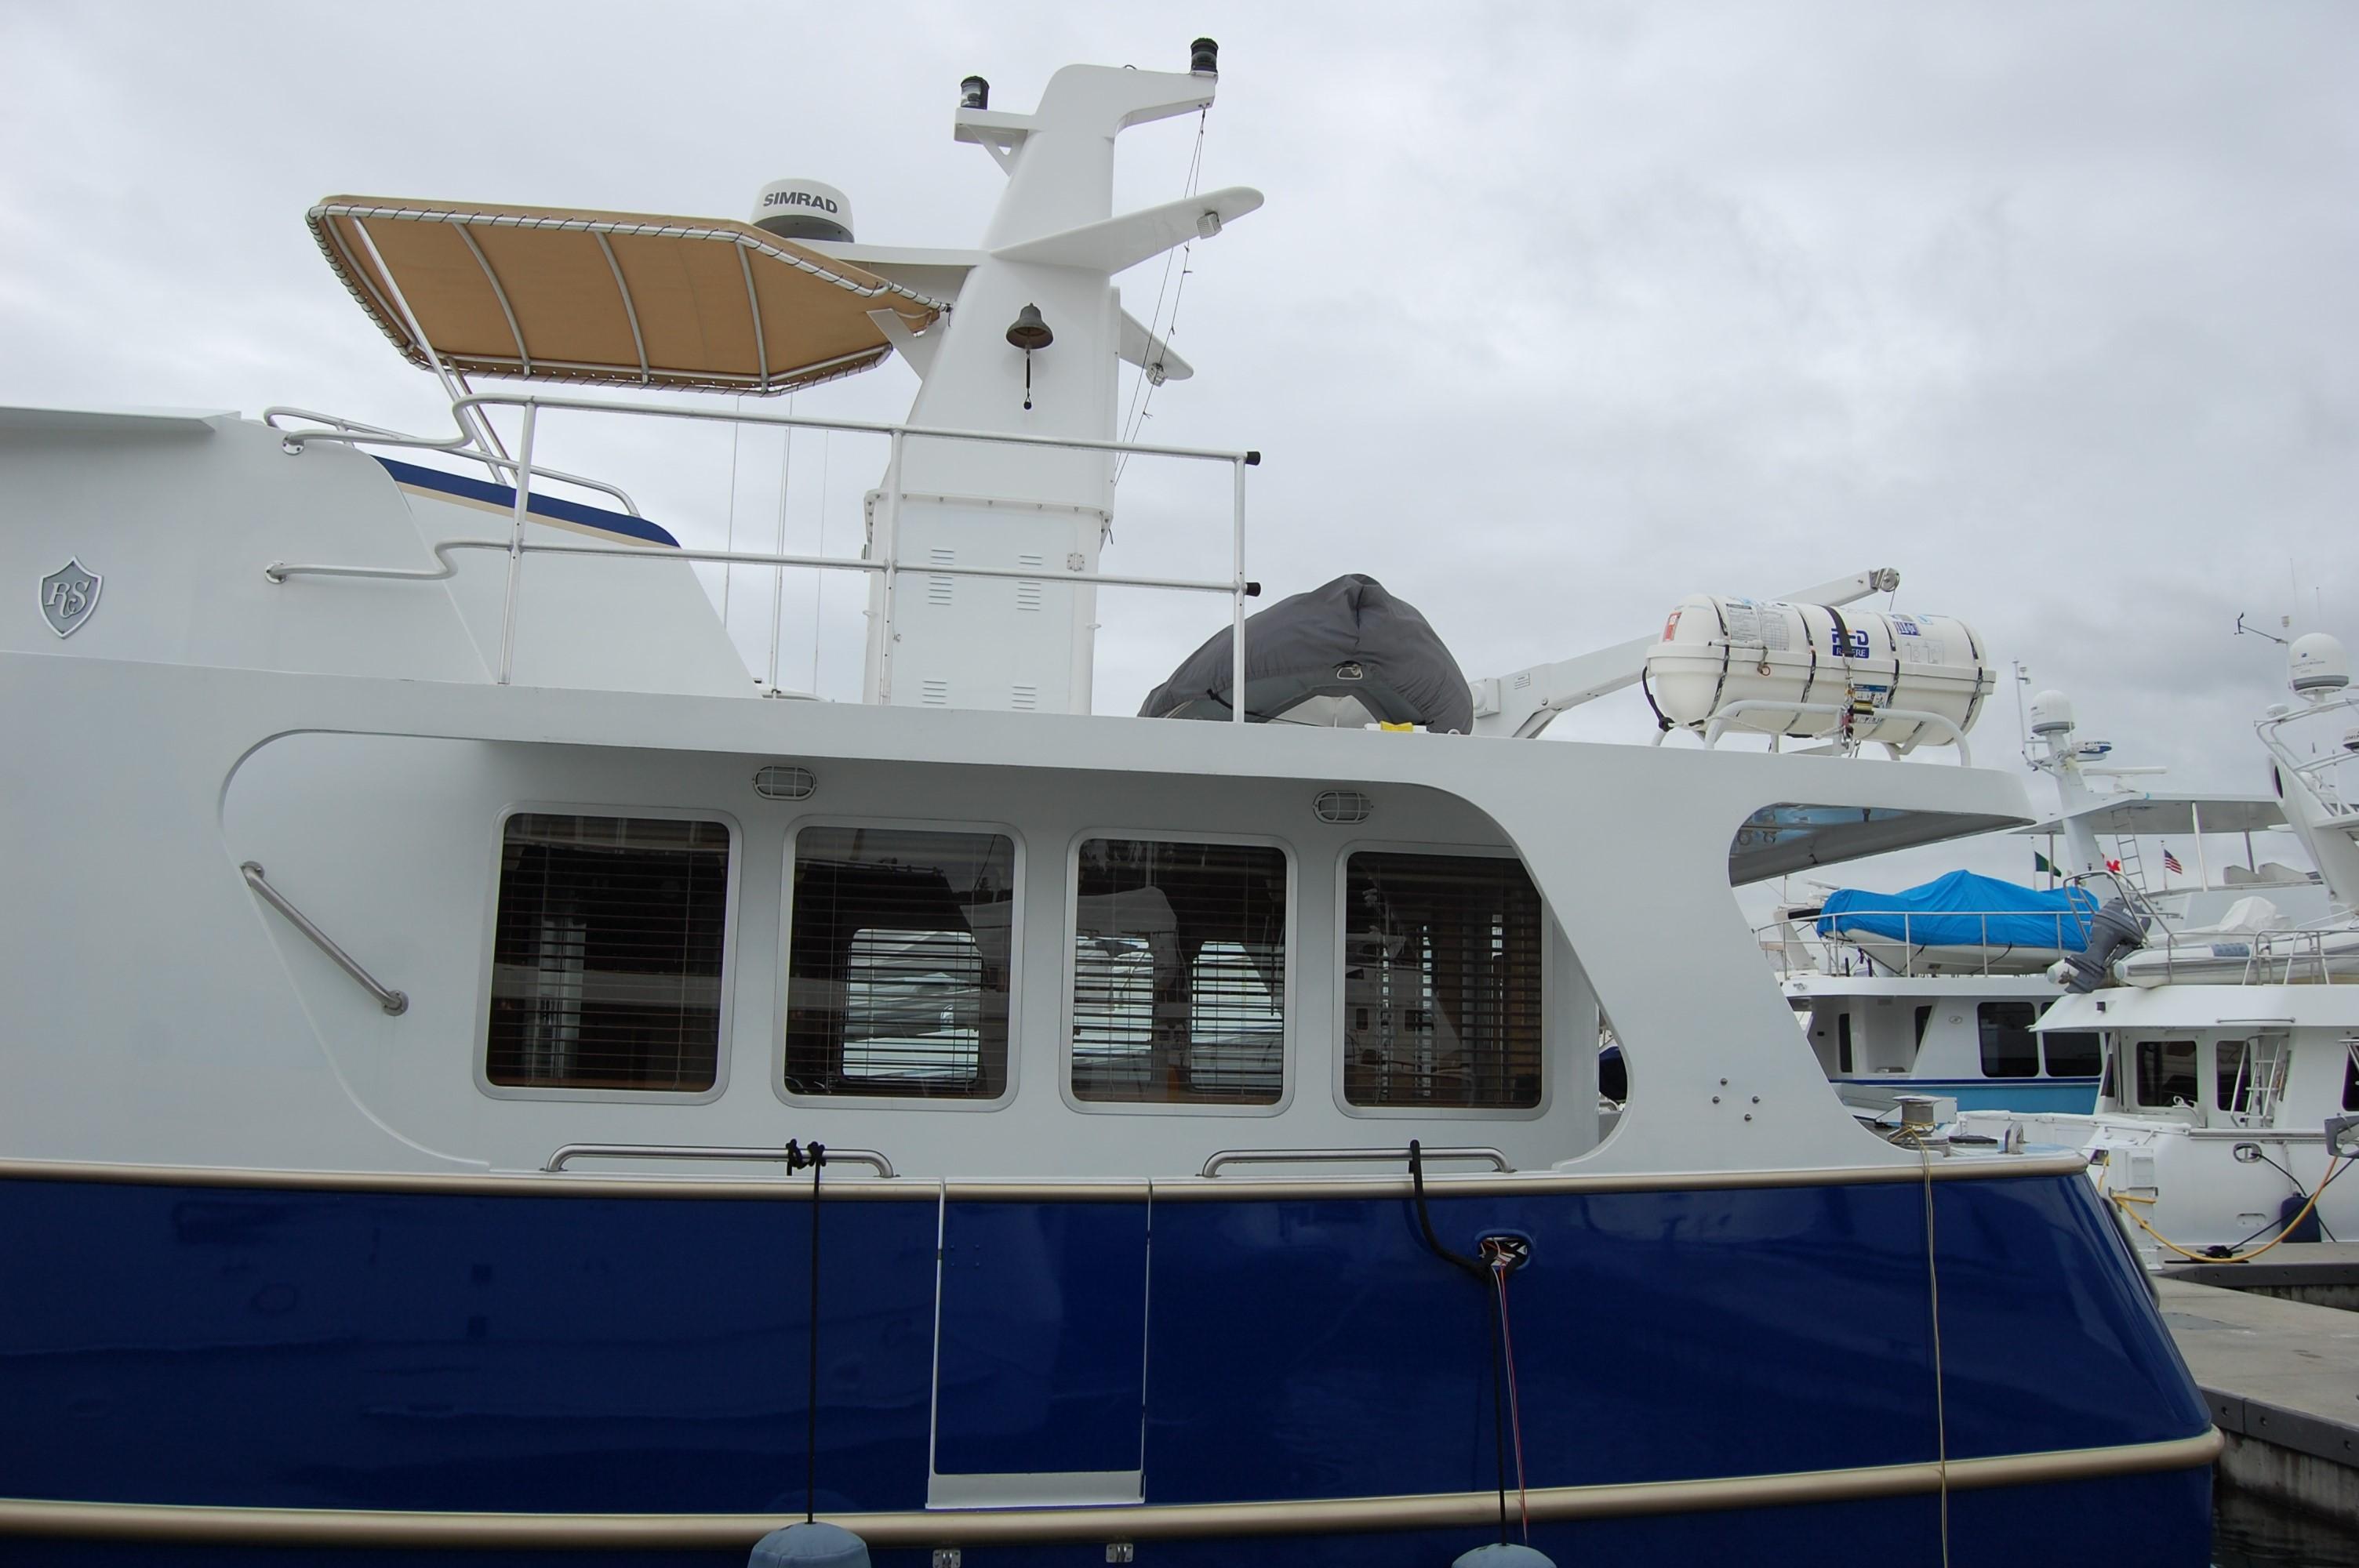 2002 Real Ships 57 pilothouse